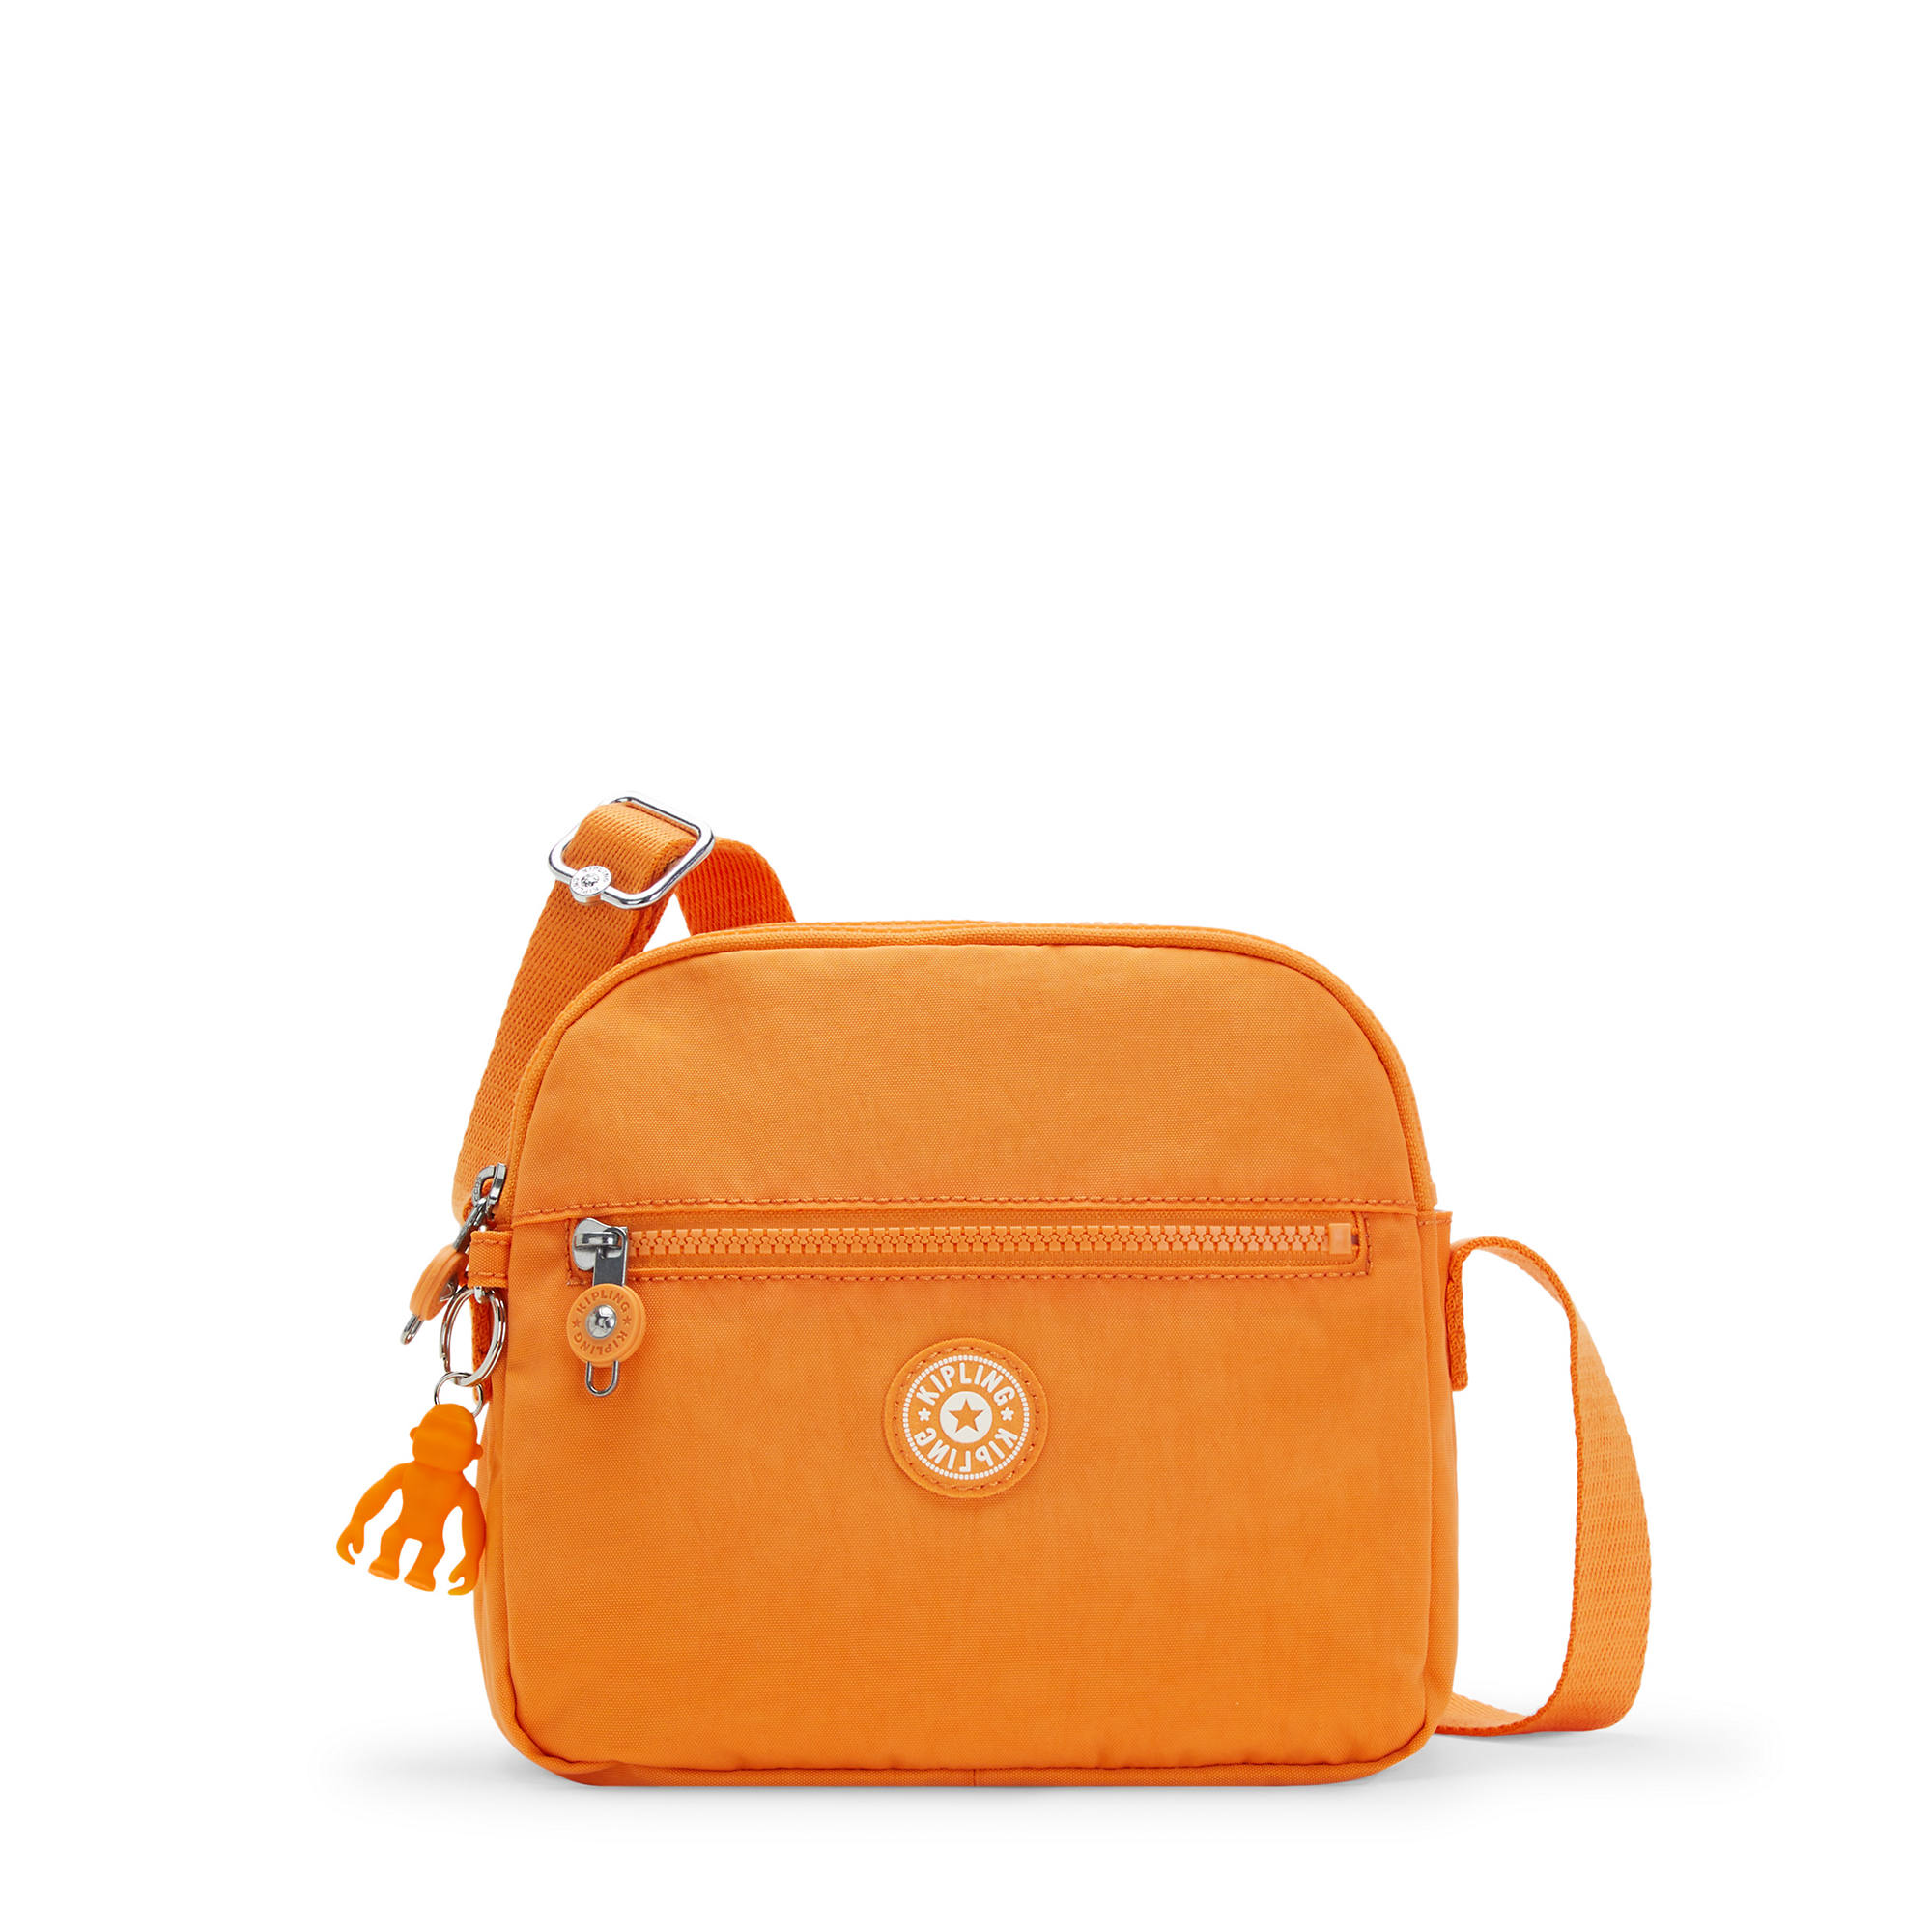 Keefe Crossbody Bag, Soft Apricot, large-zoomed